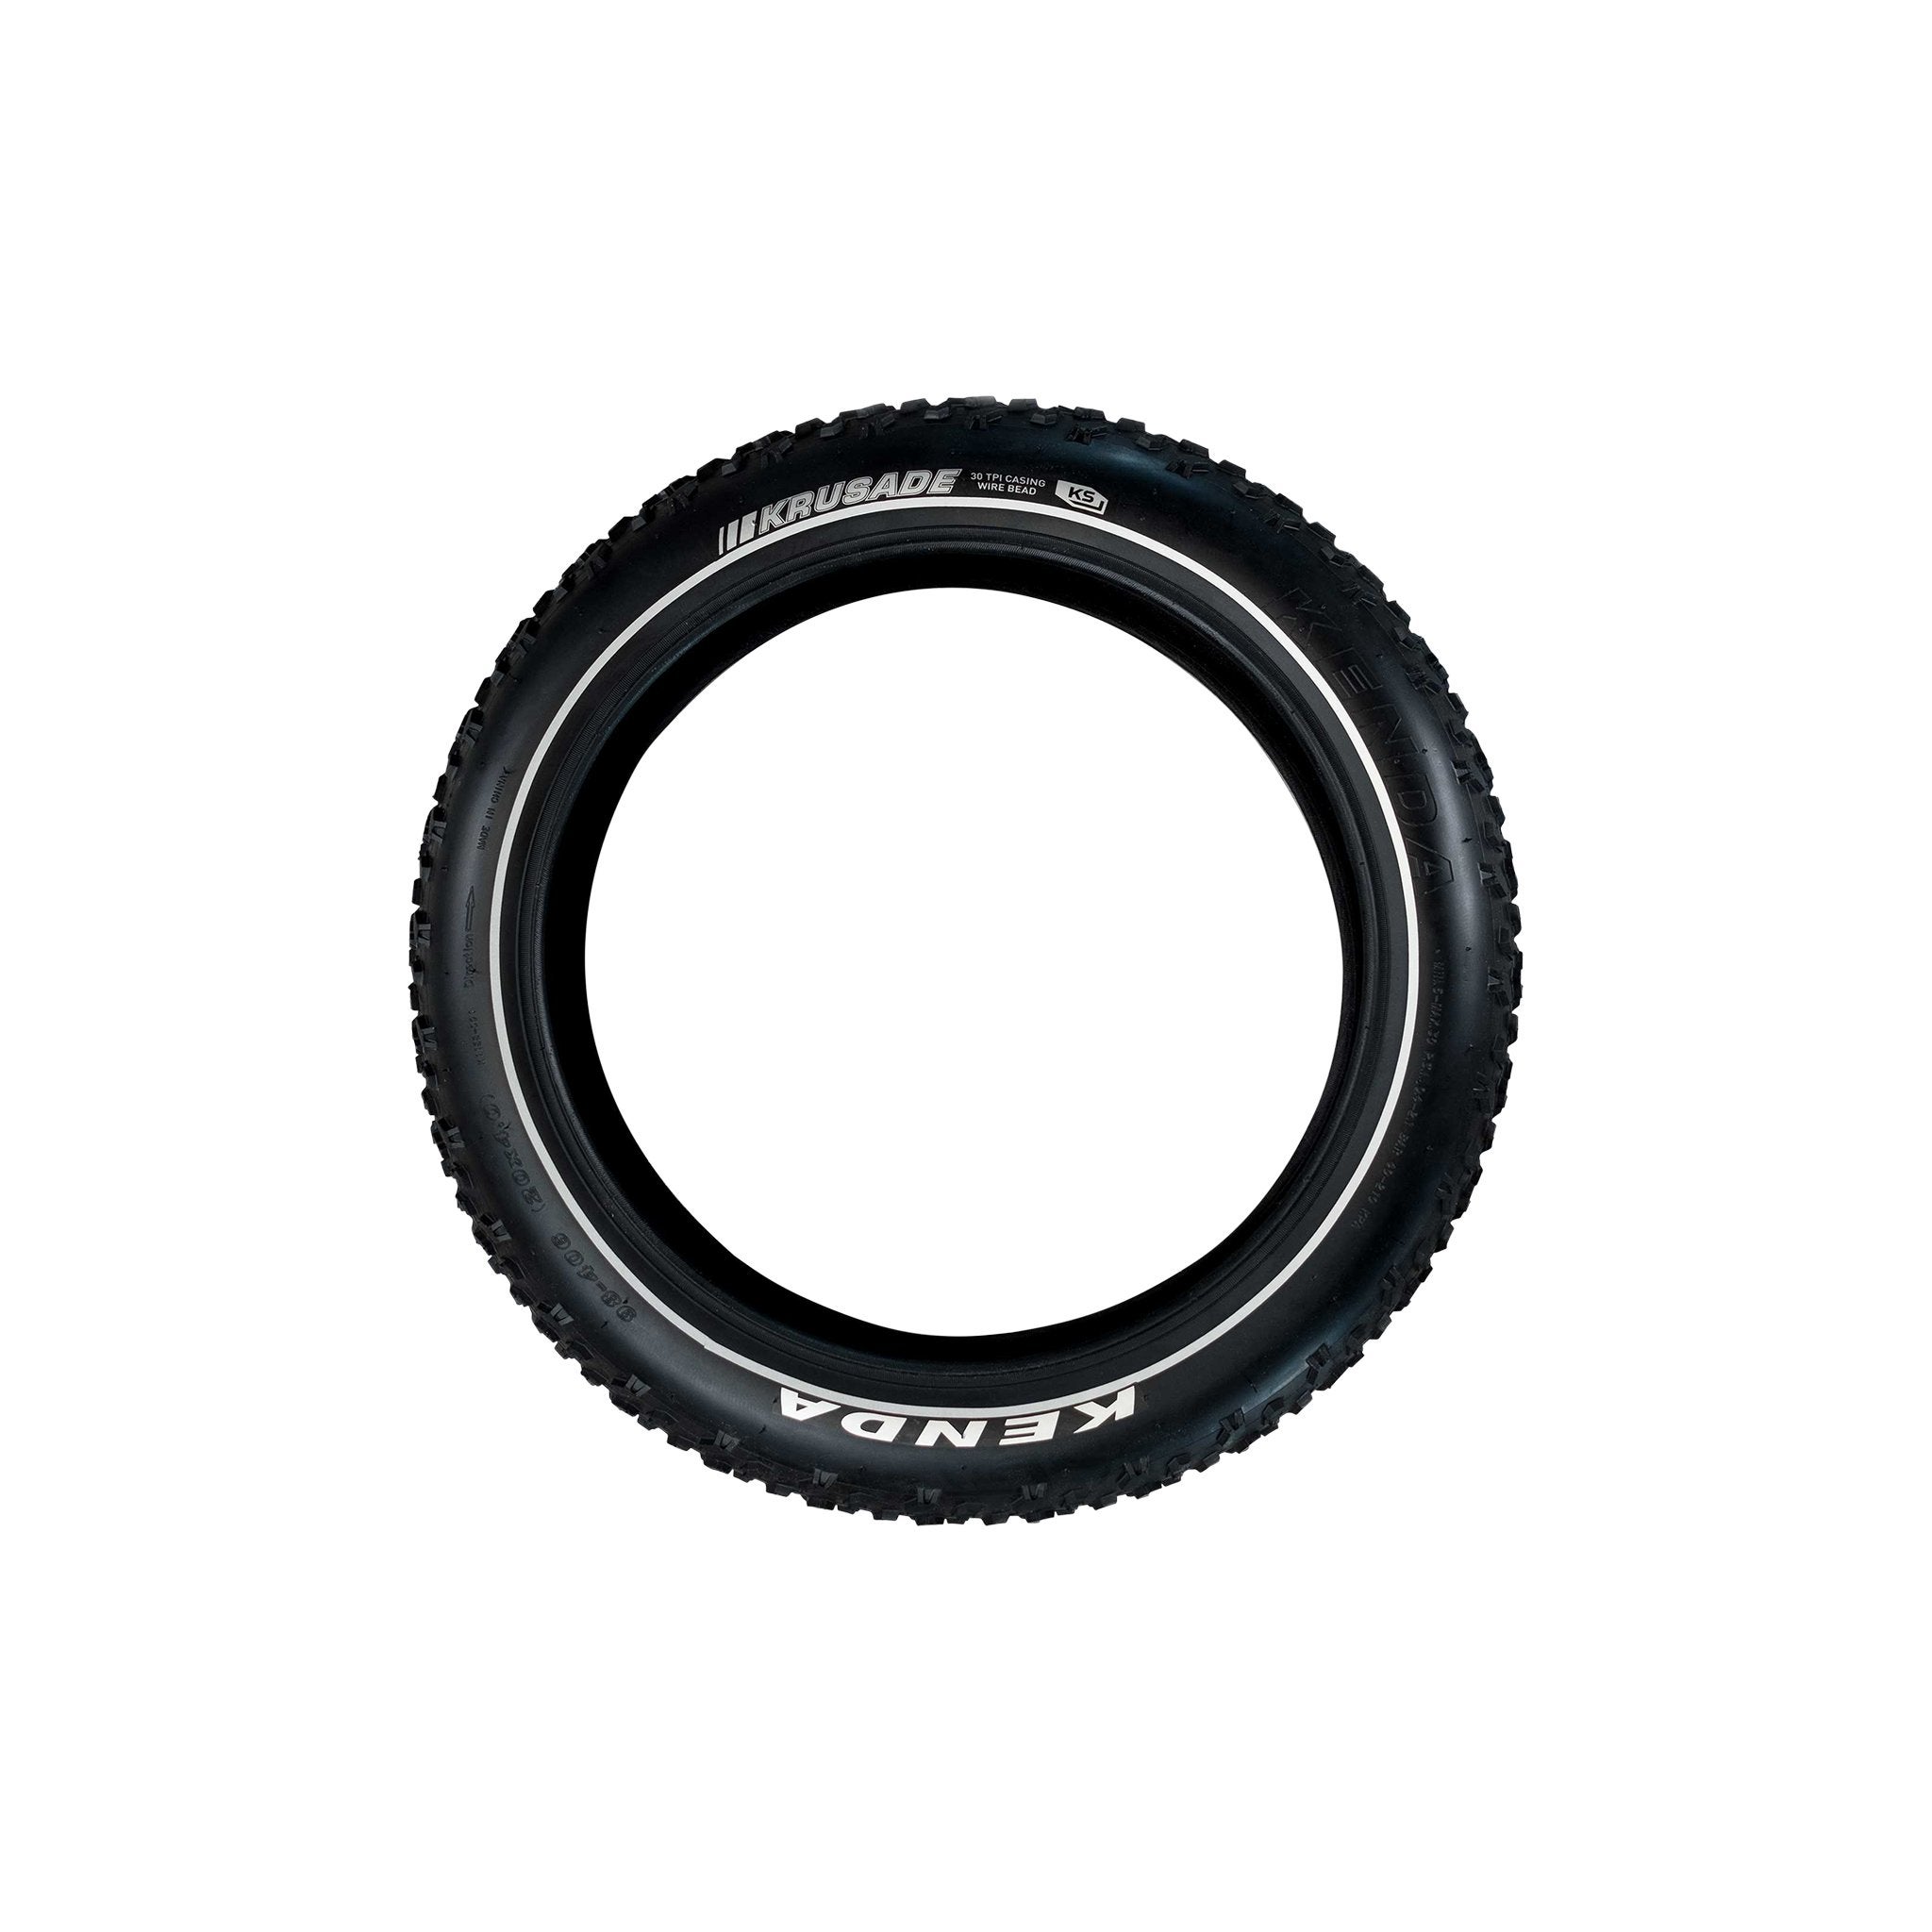 What is your favorite 20 x 4 fat bike tire?